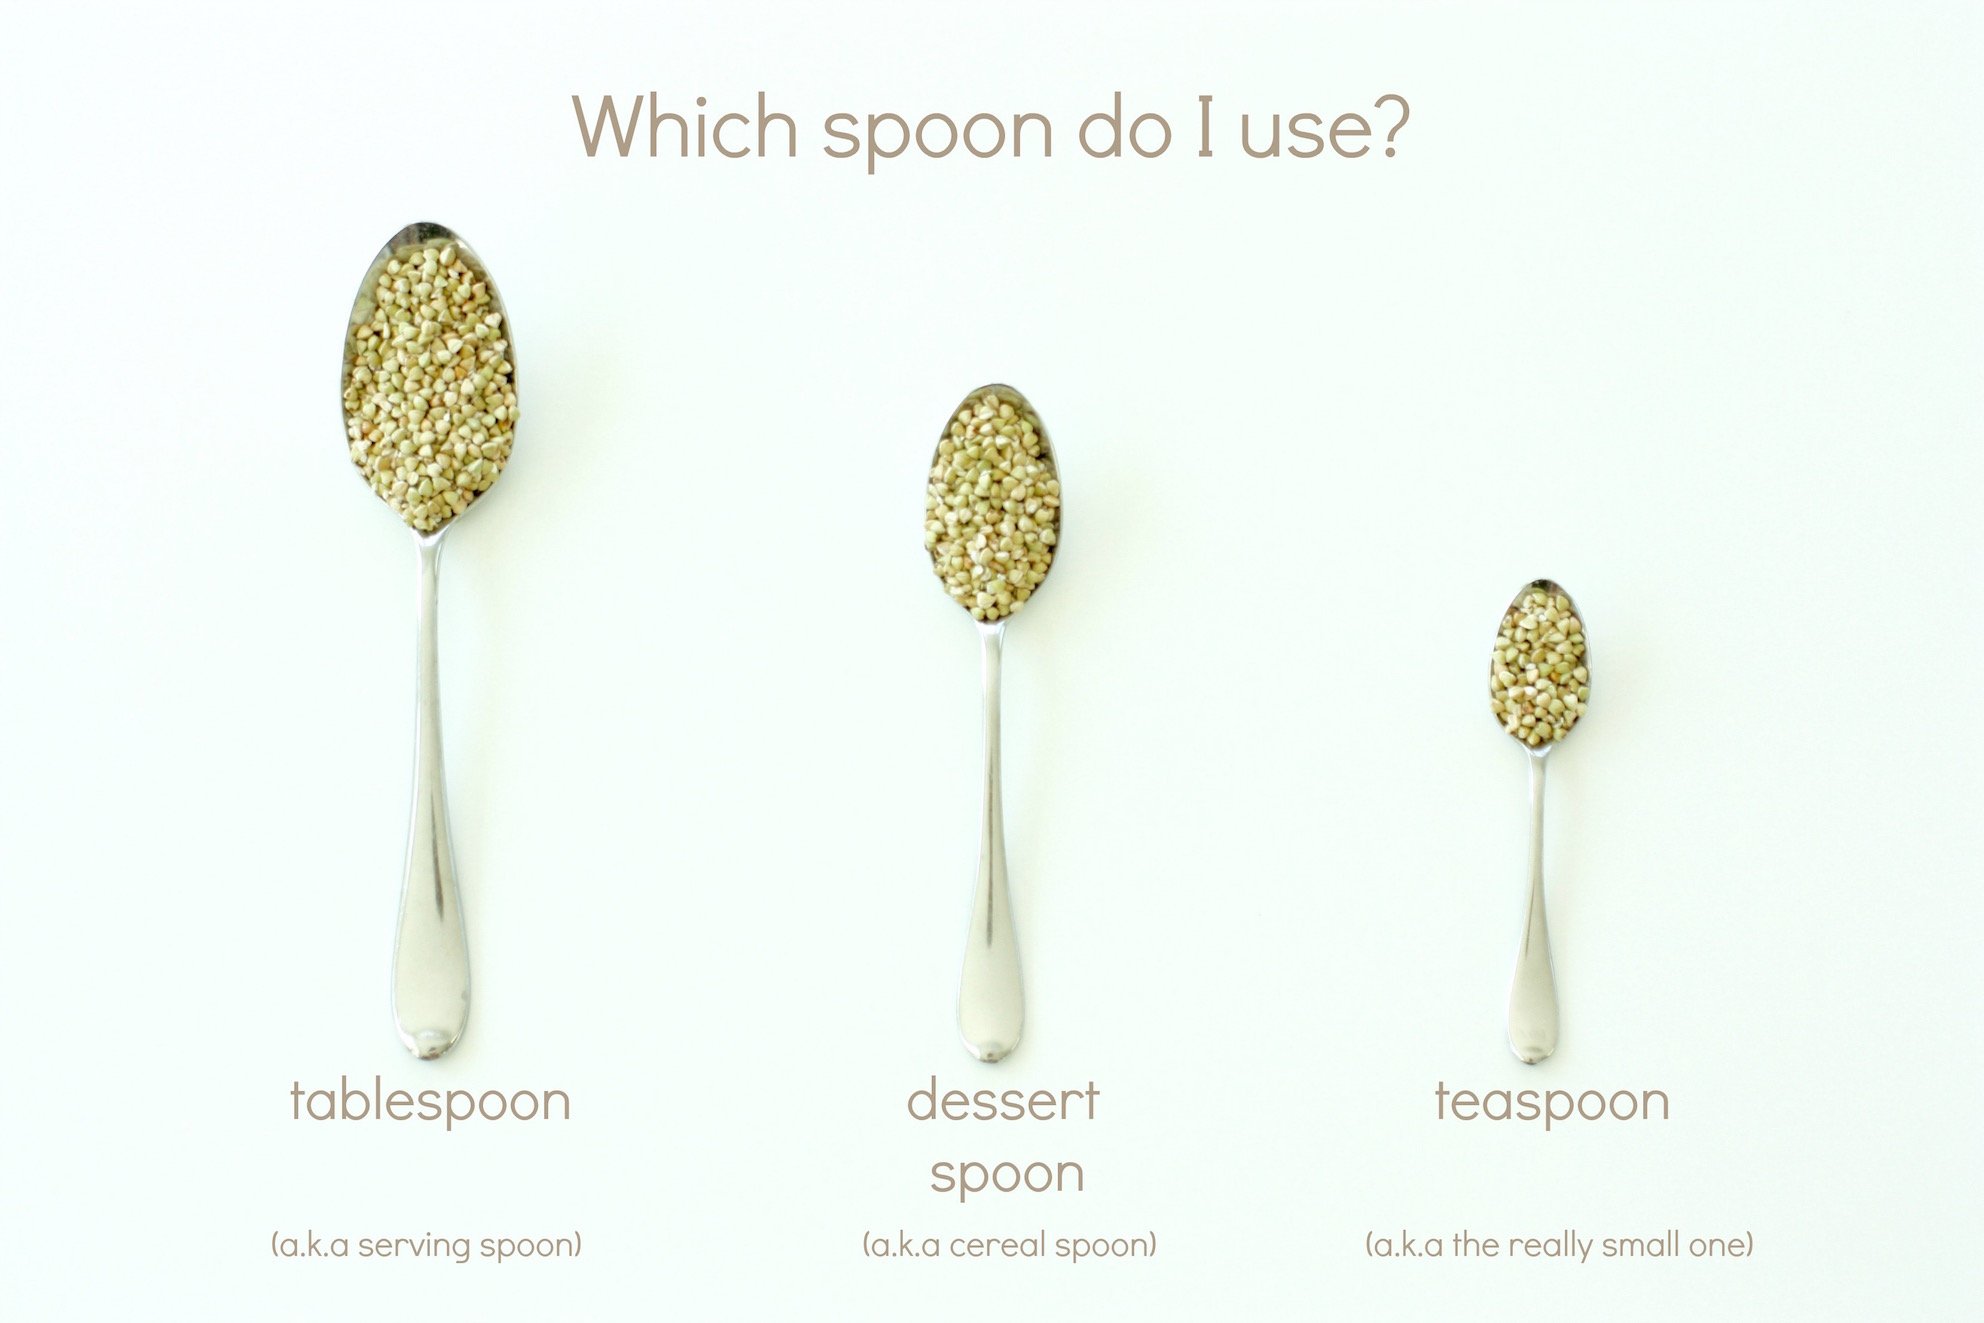 Teaching teenagers to cook involves knowing which spoon to use